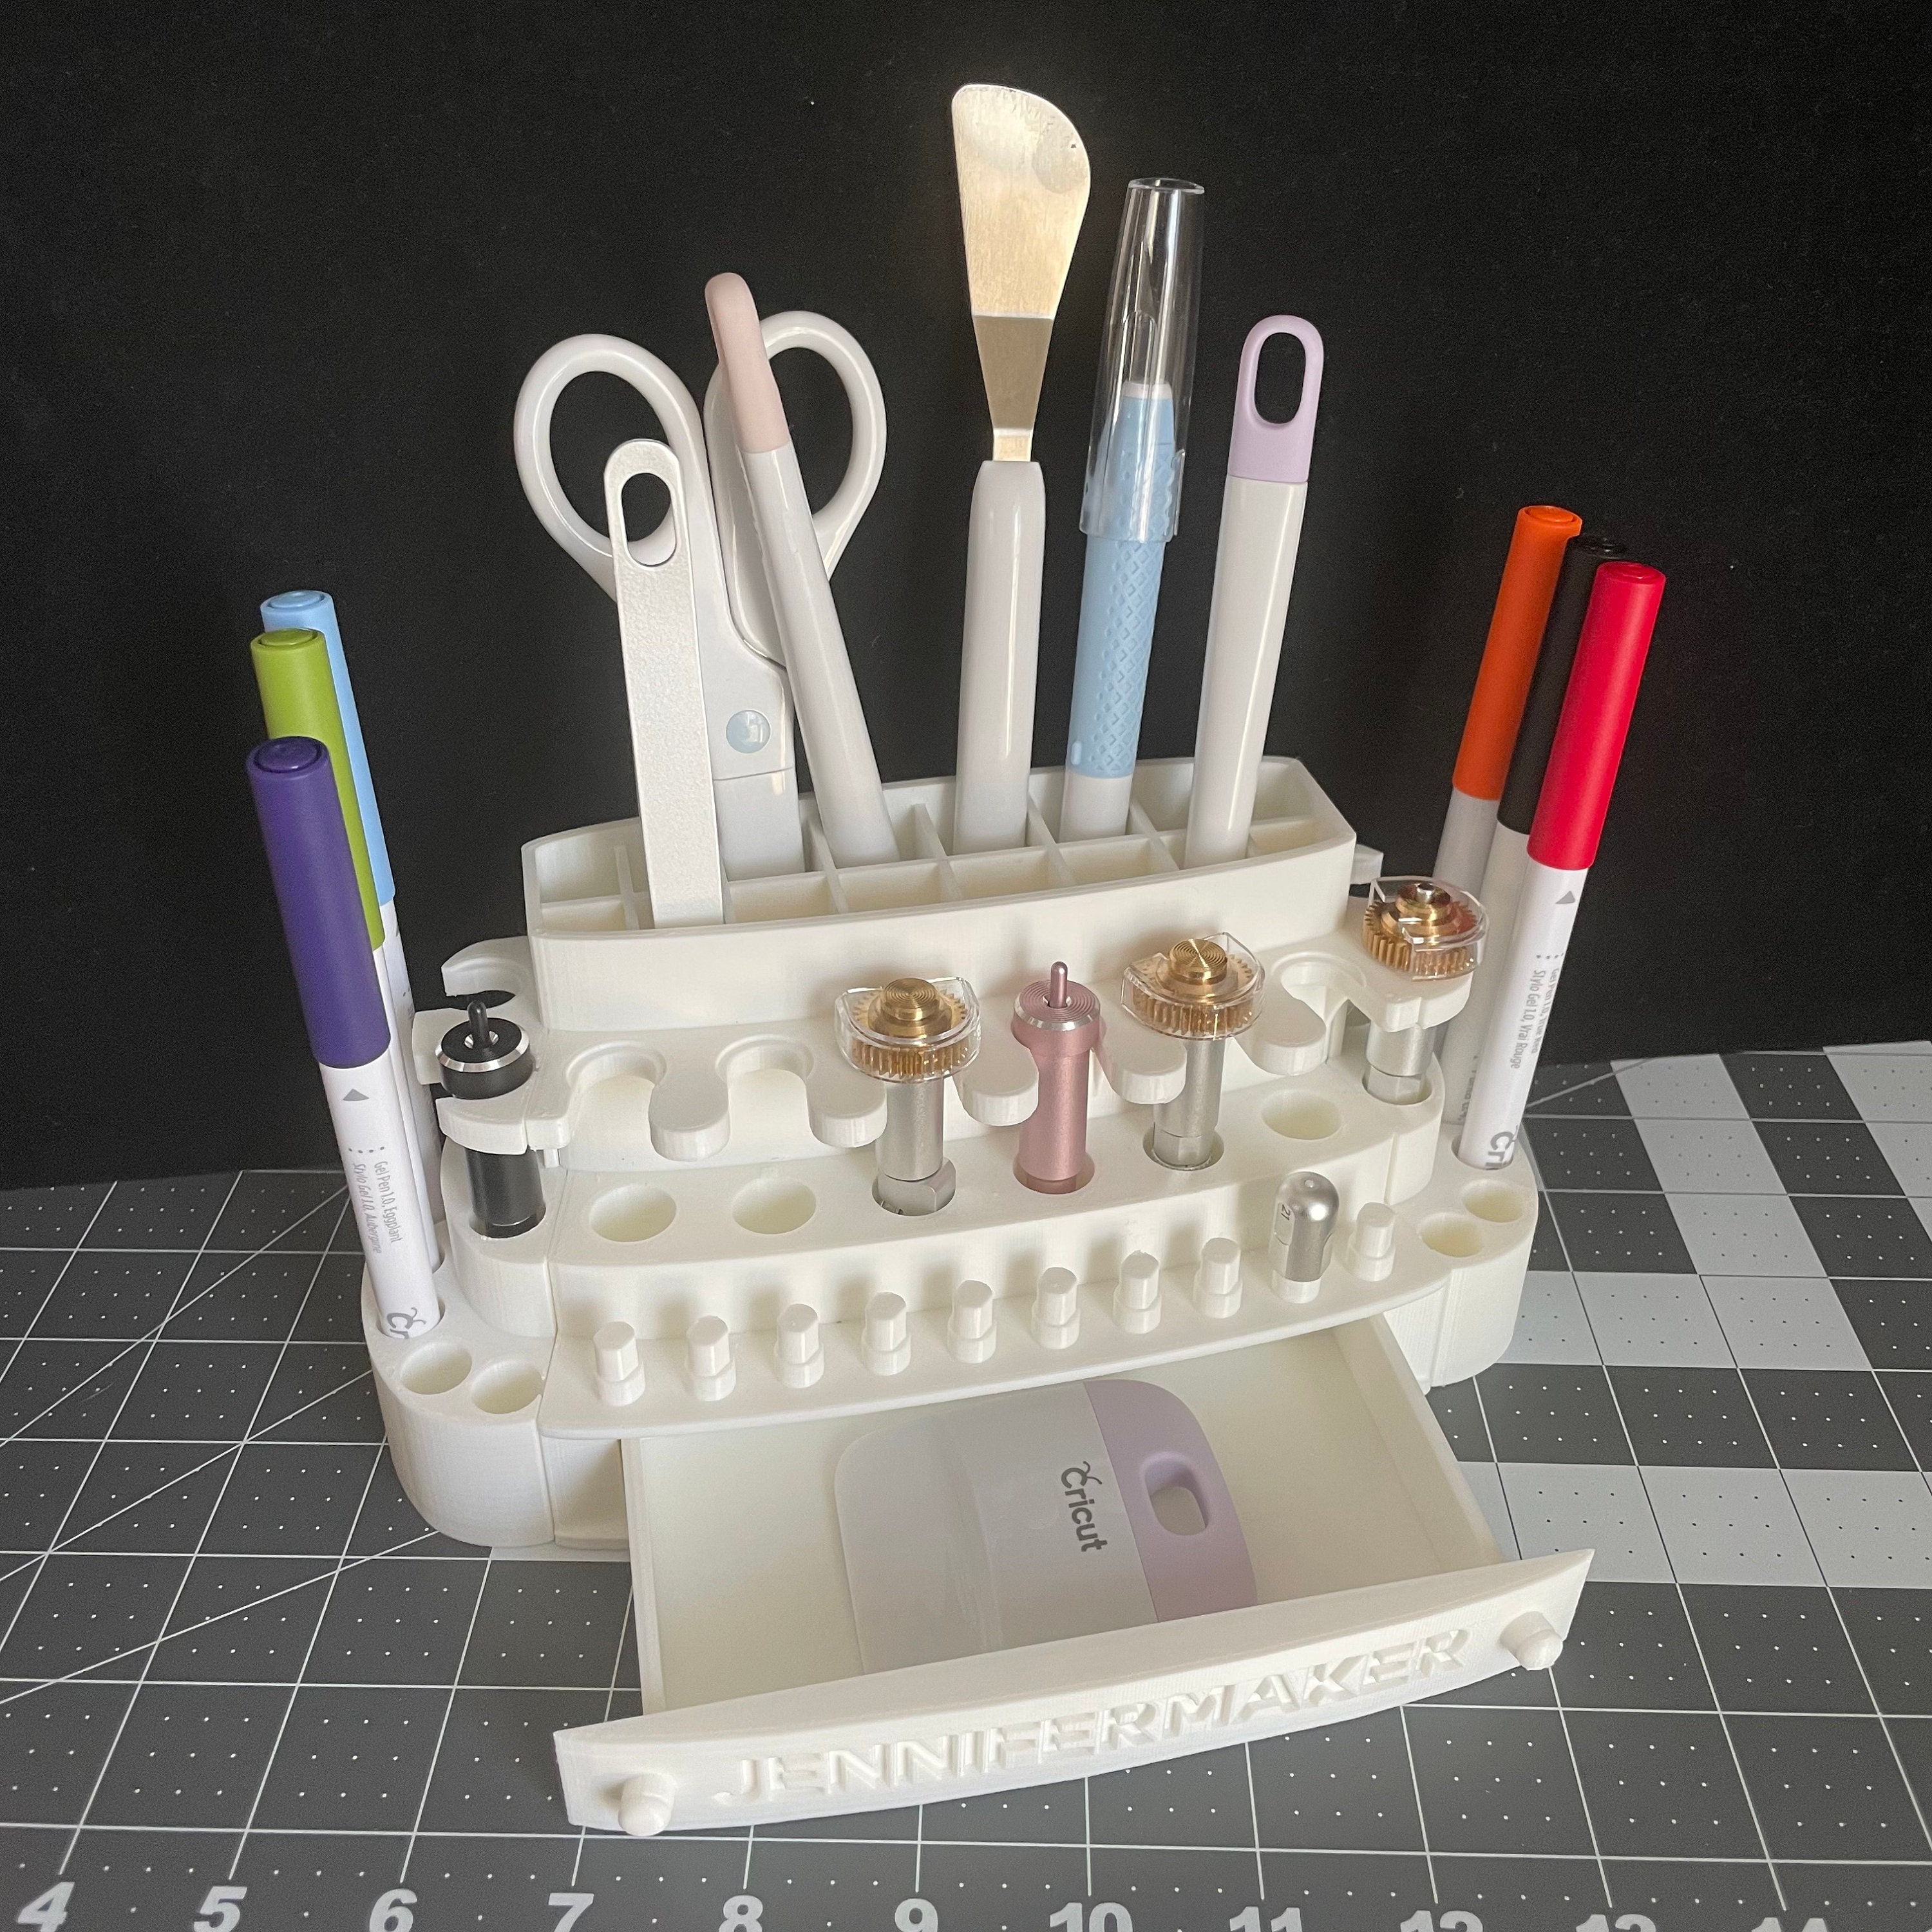 Tool Holder for Cricut Tool and Blades Designed by Jennifer Maker